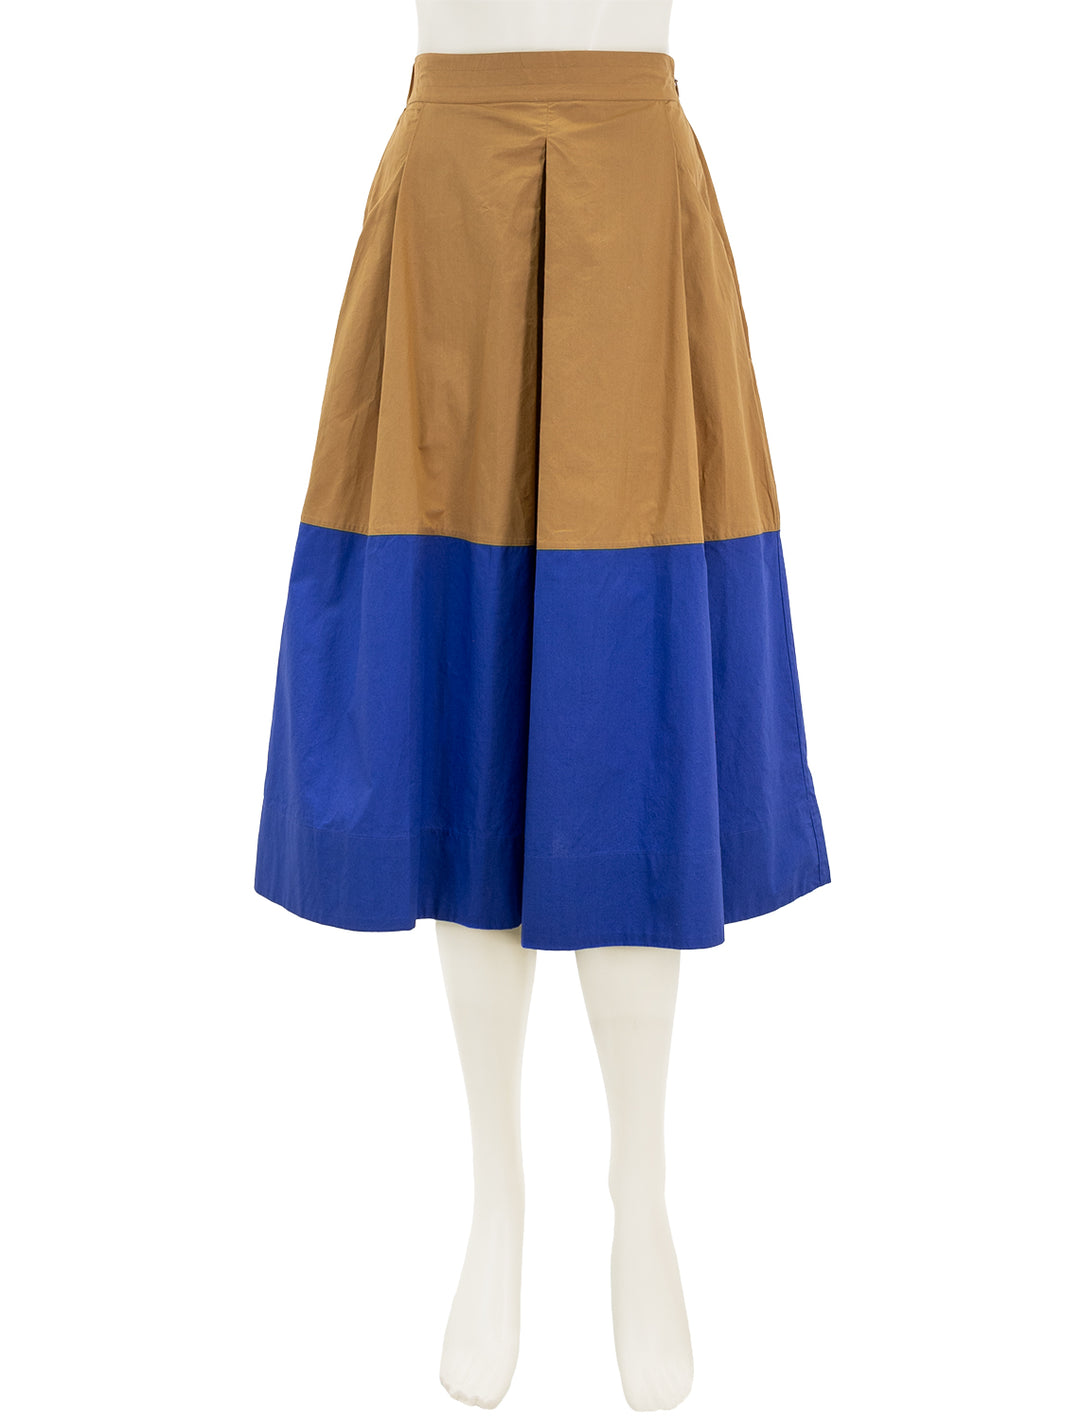 Front view of Clare V.'s genevieve skirt in khaki and cobalt.